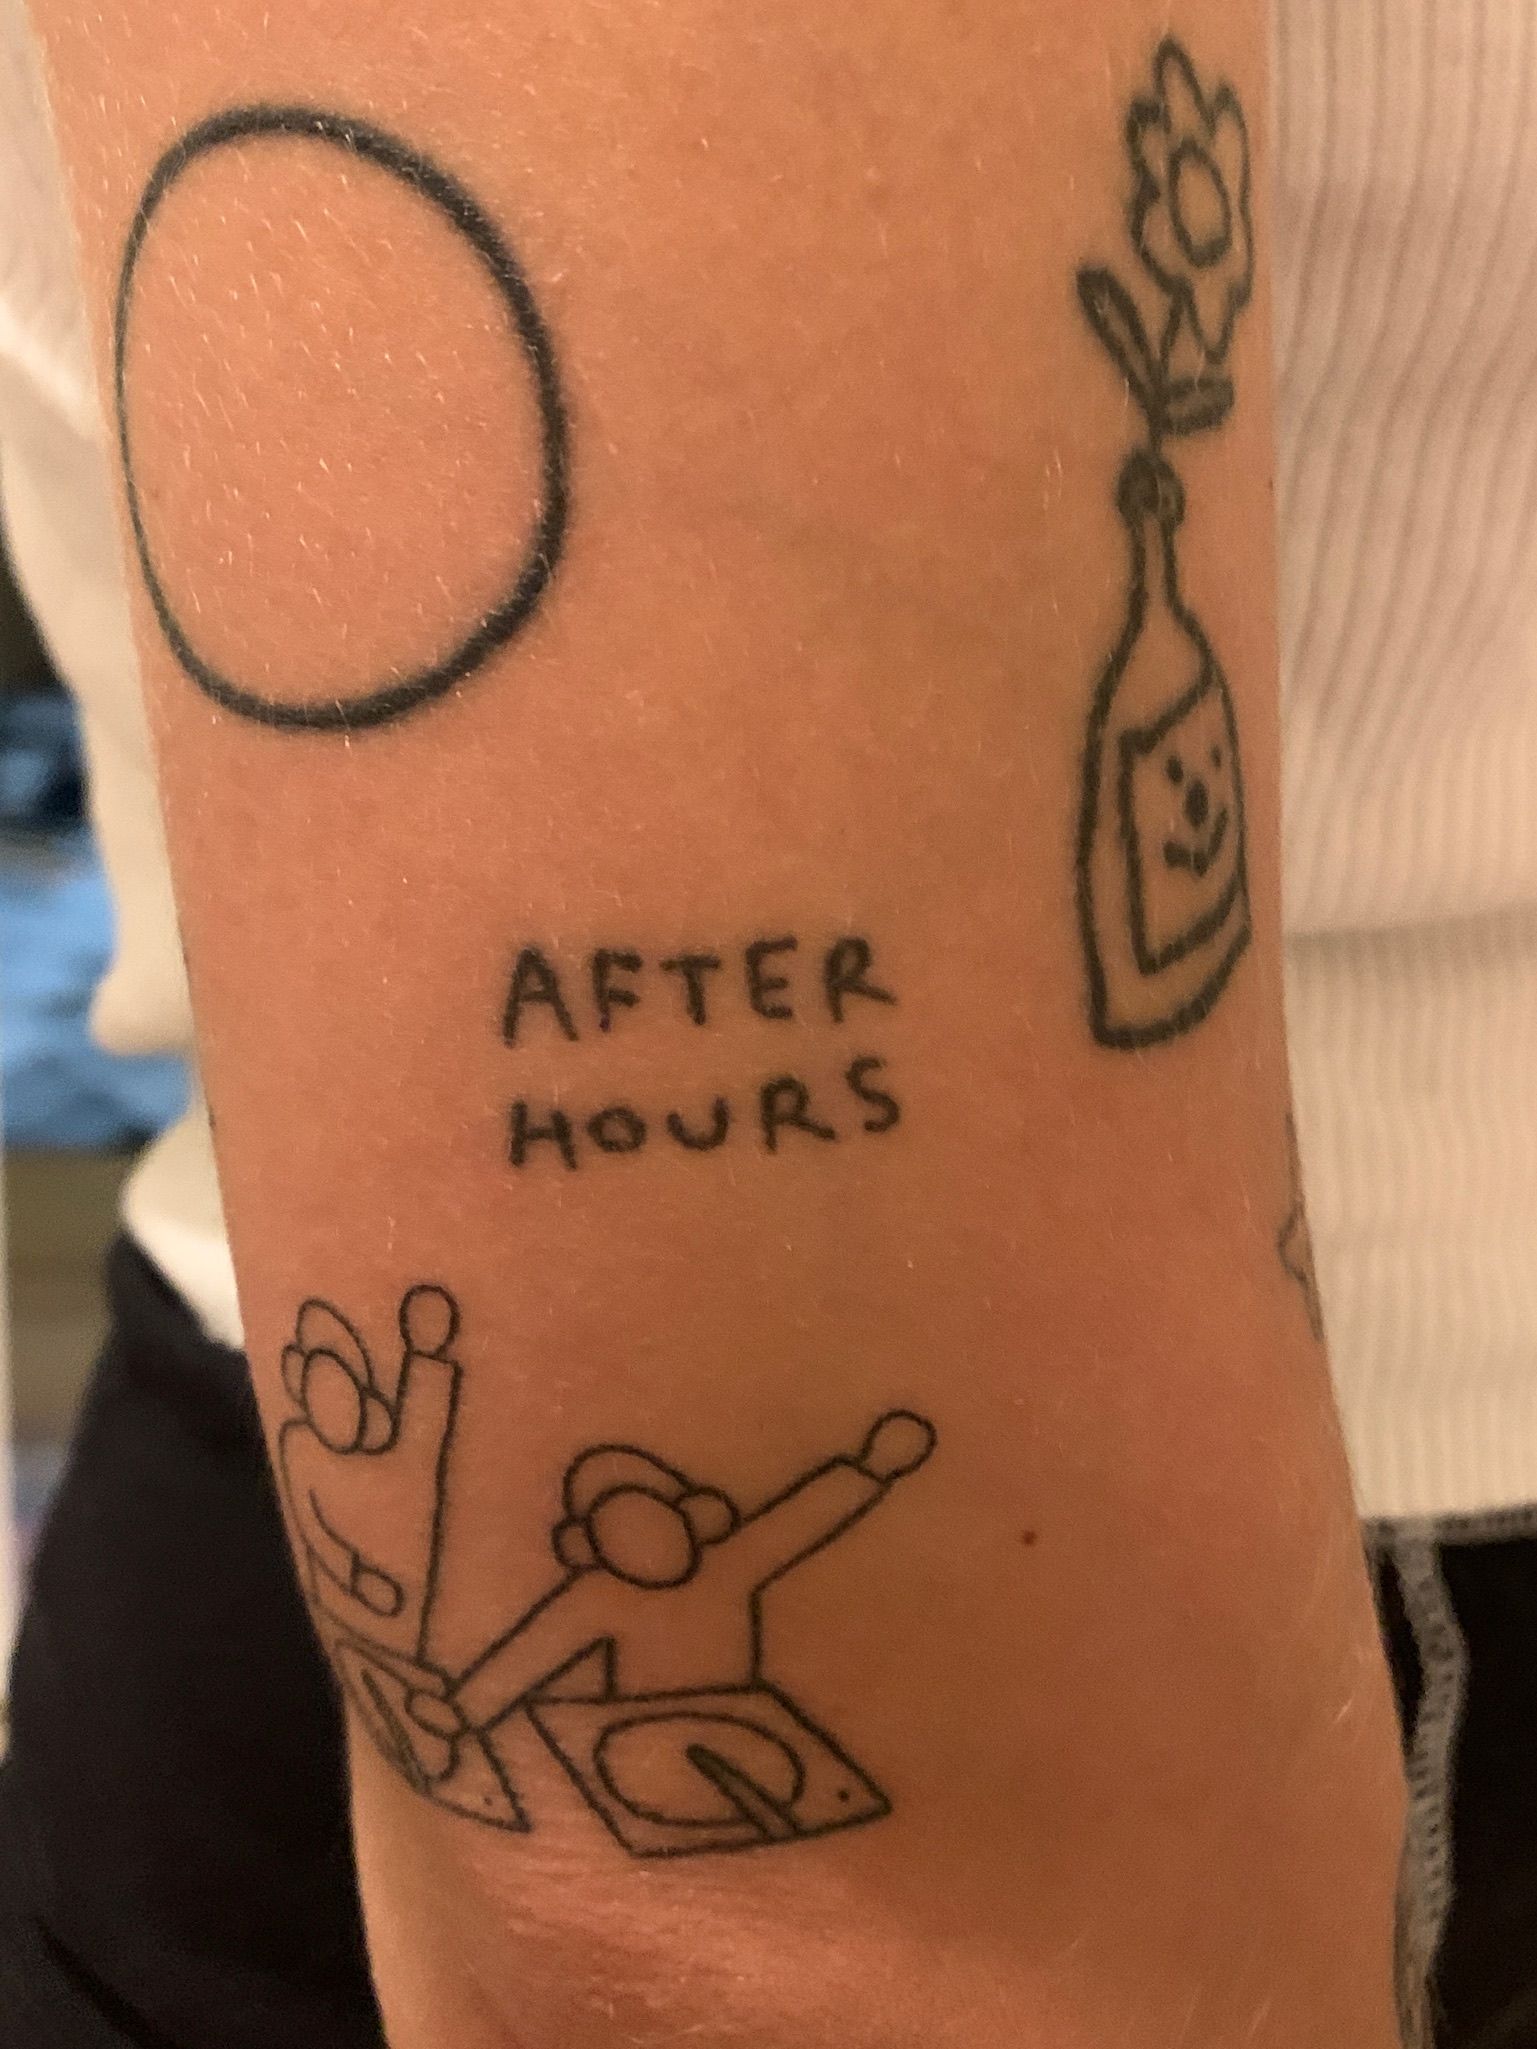 After Hours' business name tattooed on skin